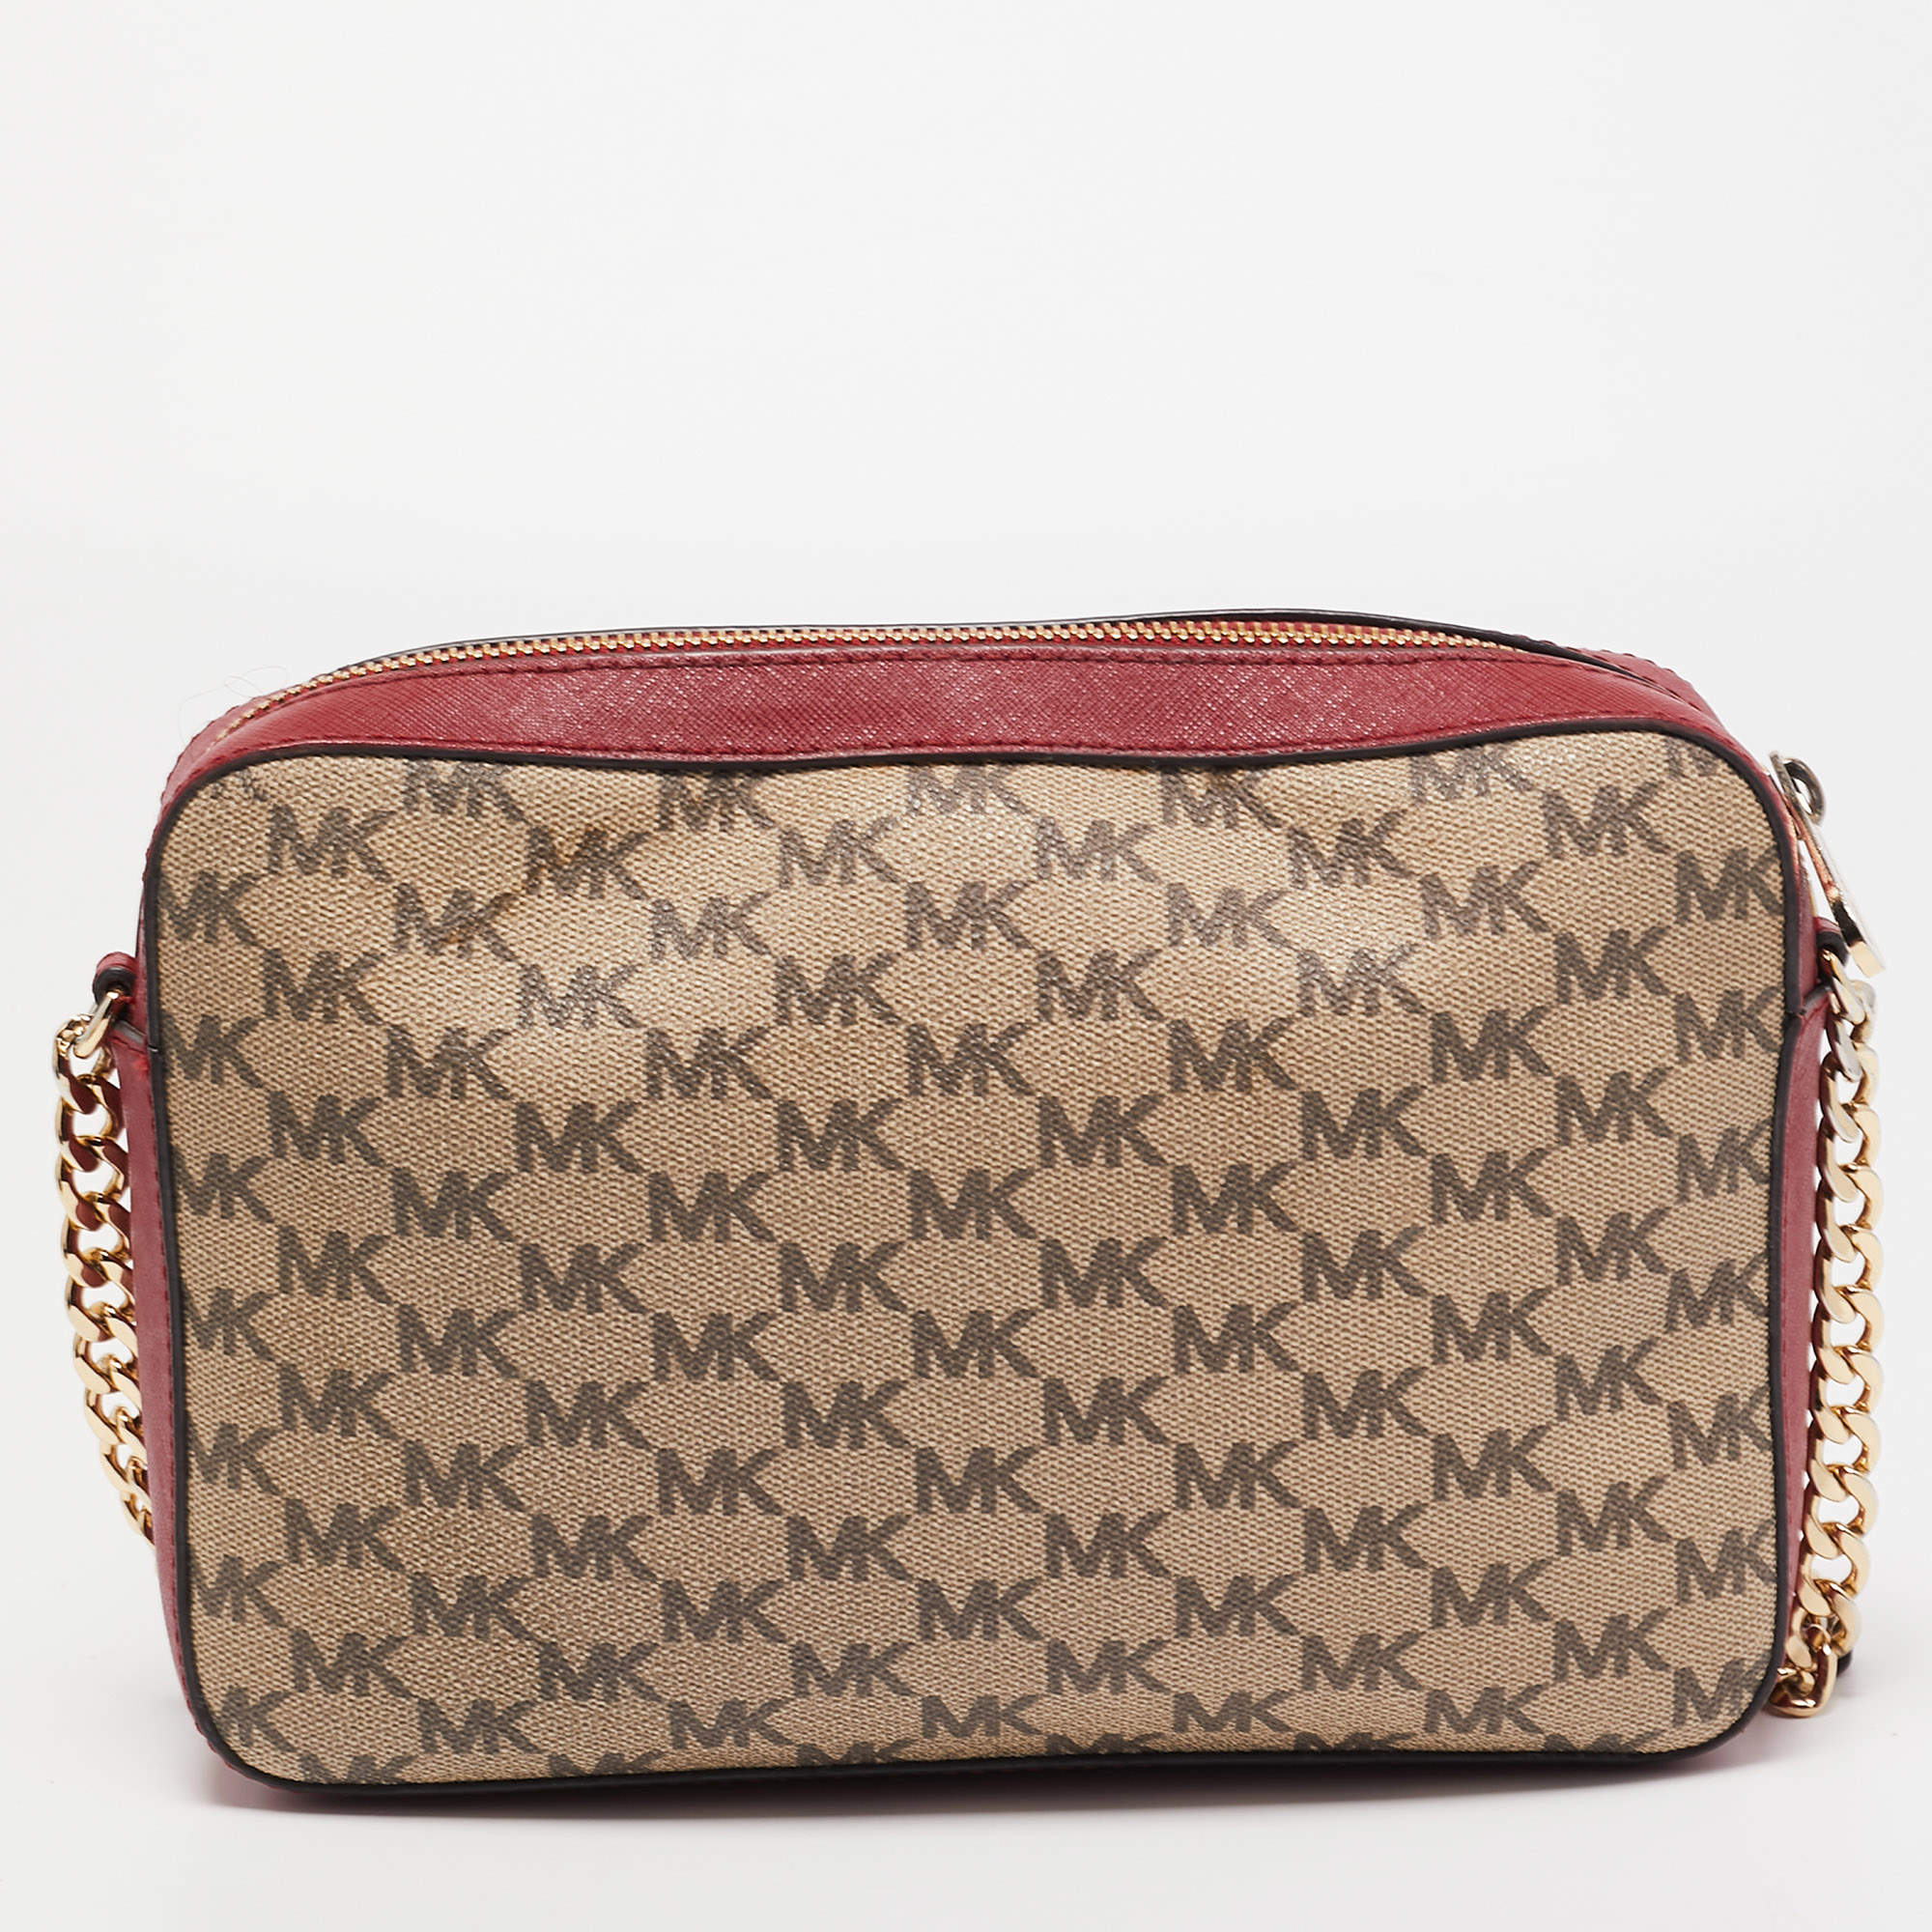 Michael Kors tote or Louis Vuitton Neverfull 